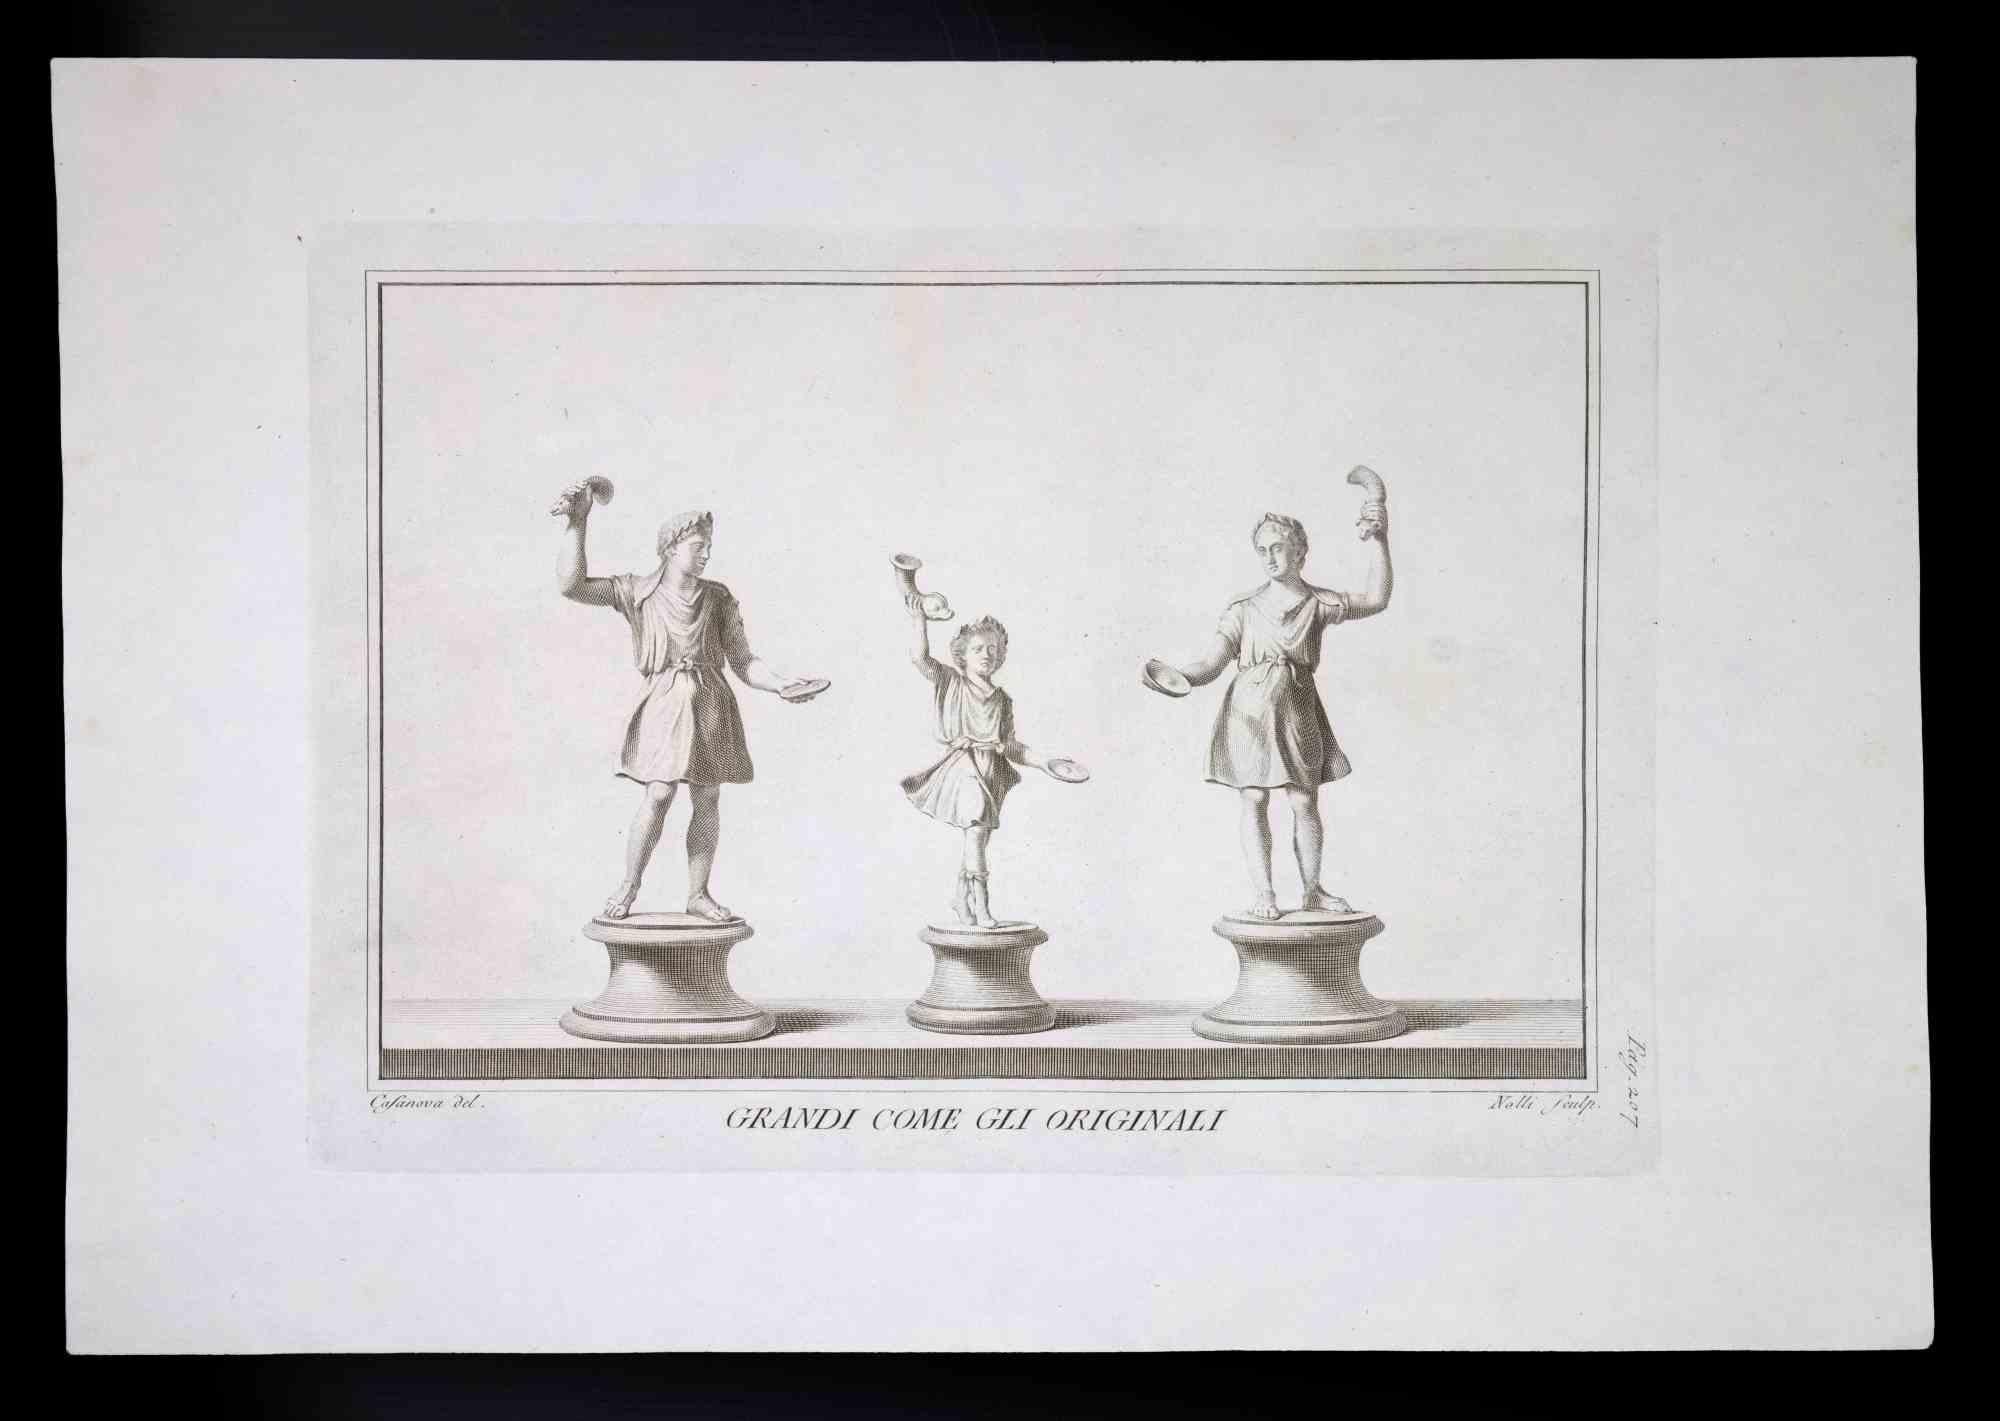 Carlo Nolli Figurative Print - Ancient Roman Statues with Grails - Etching by C. Nolli - 18th century